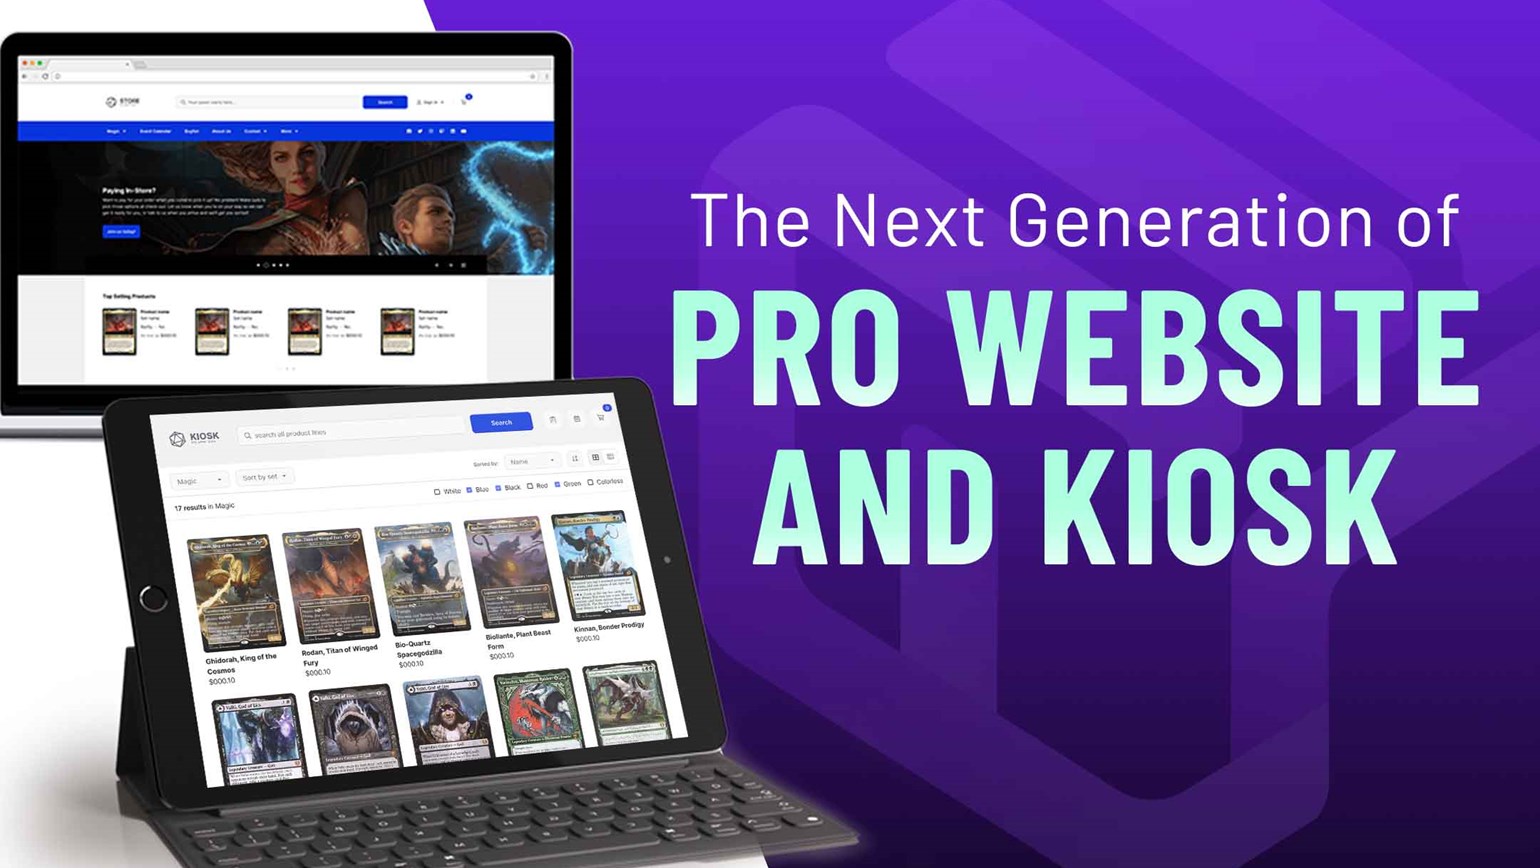 Introducing the Next Generation of Pro Website and Kiosk